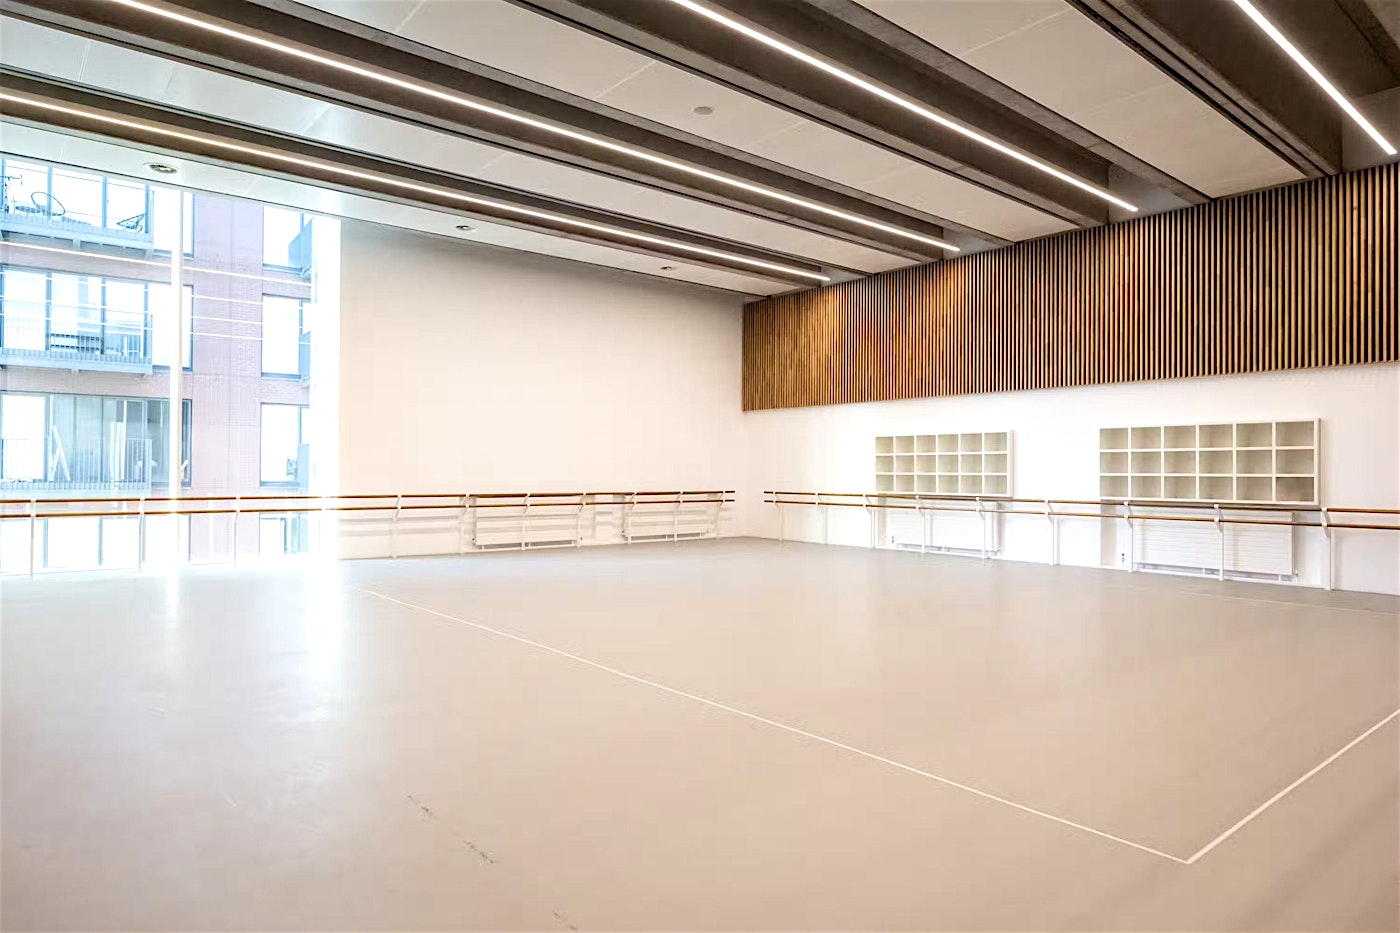 The rehearsal room at English National Ballet, east London